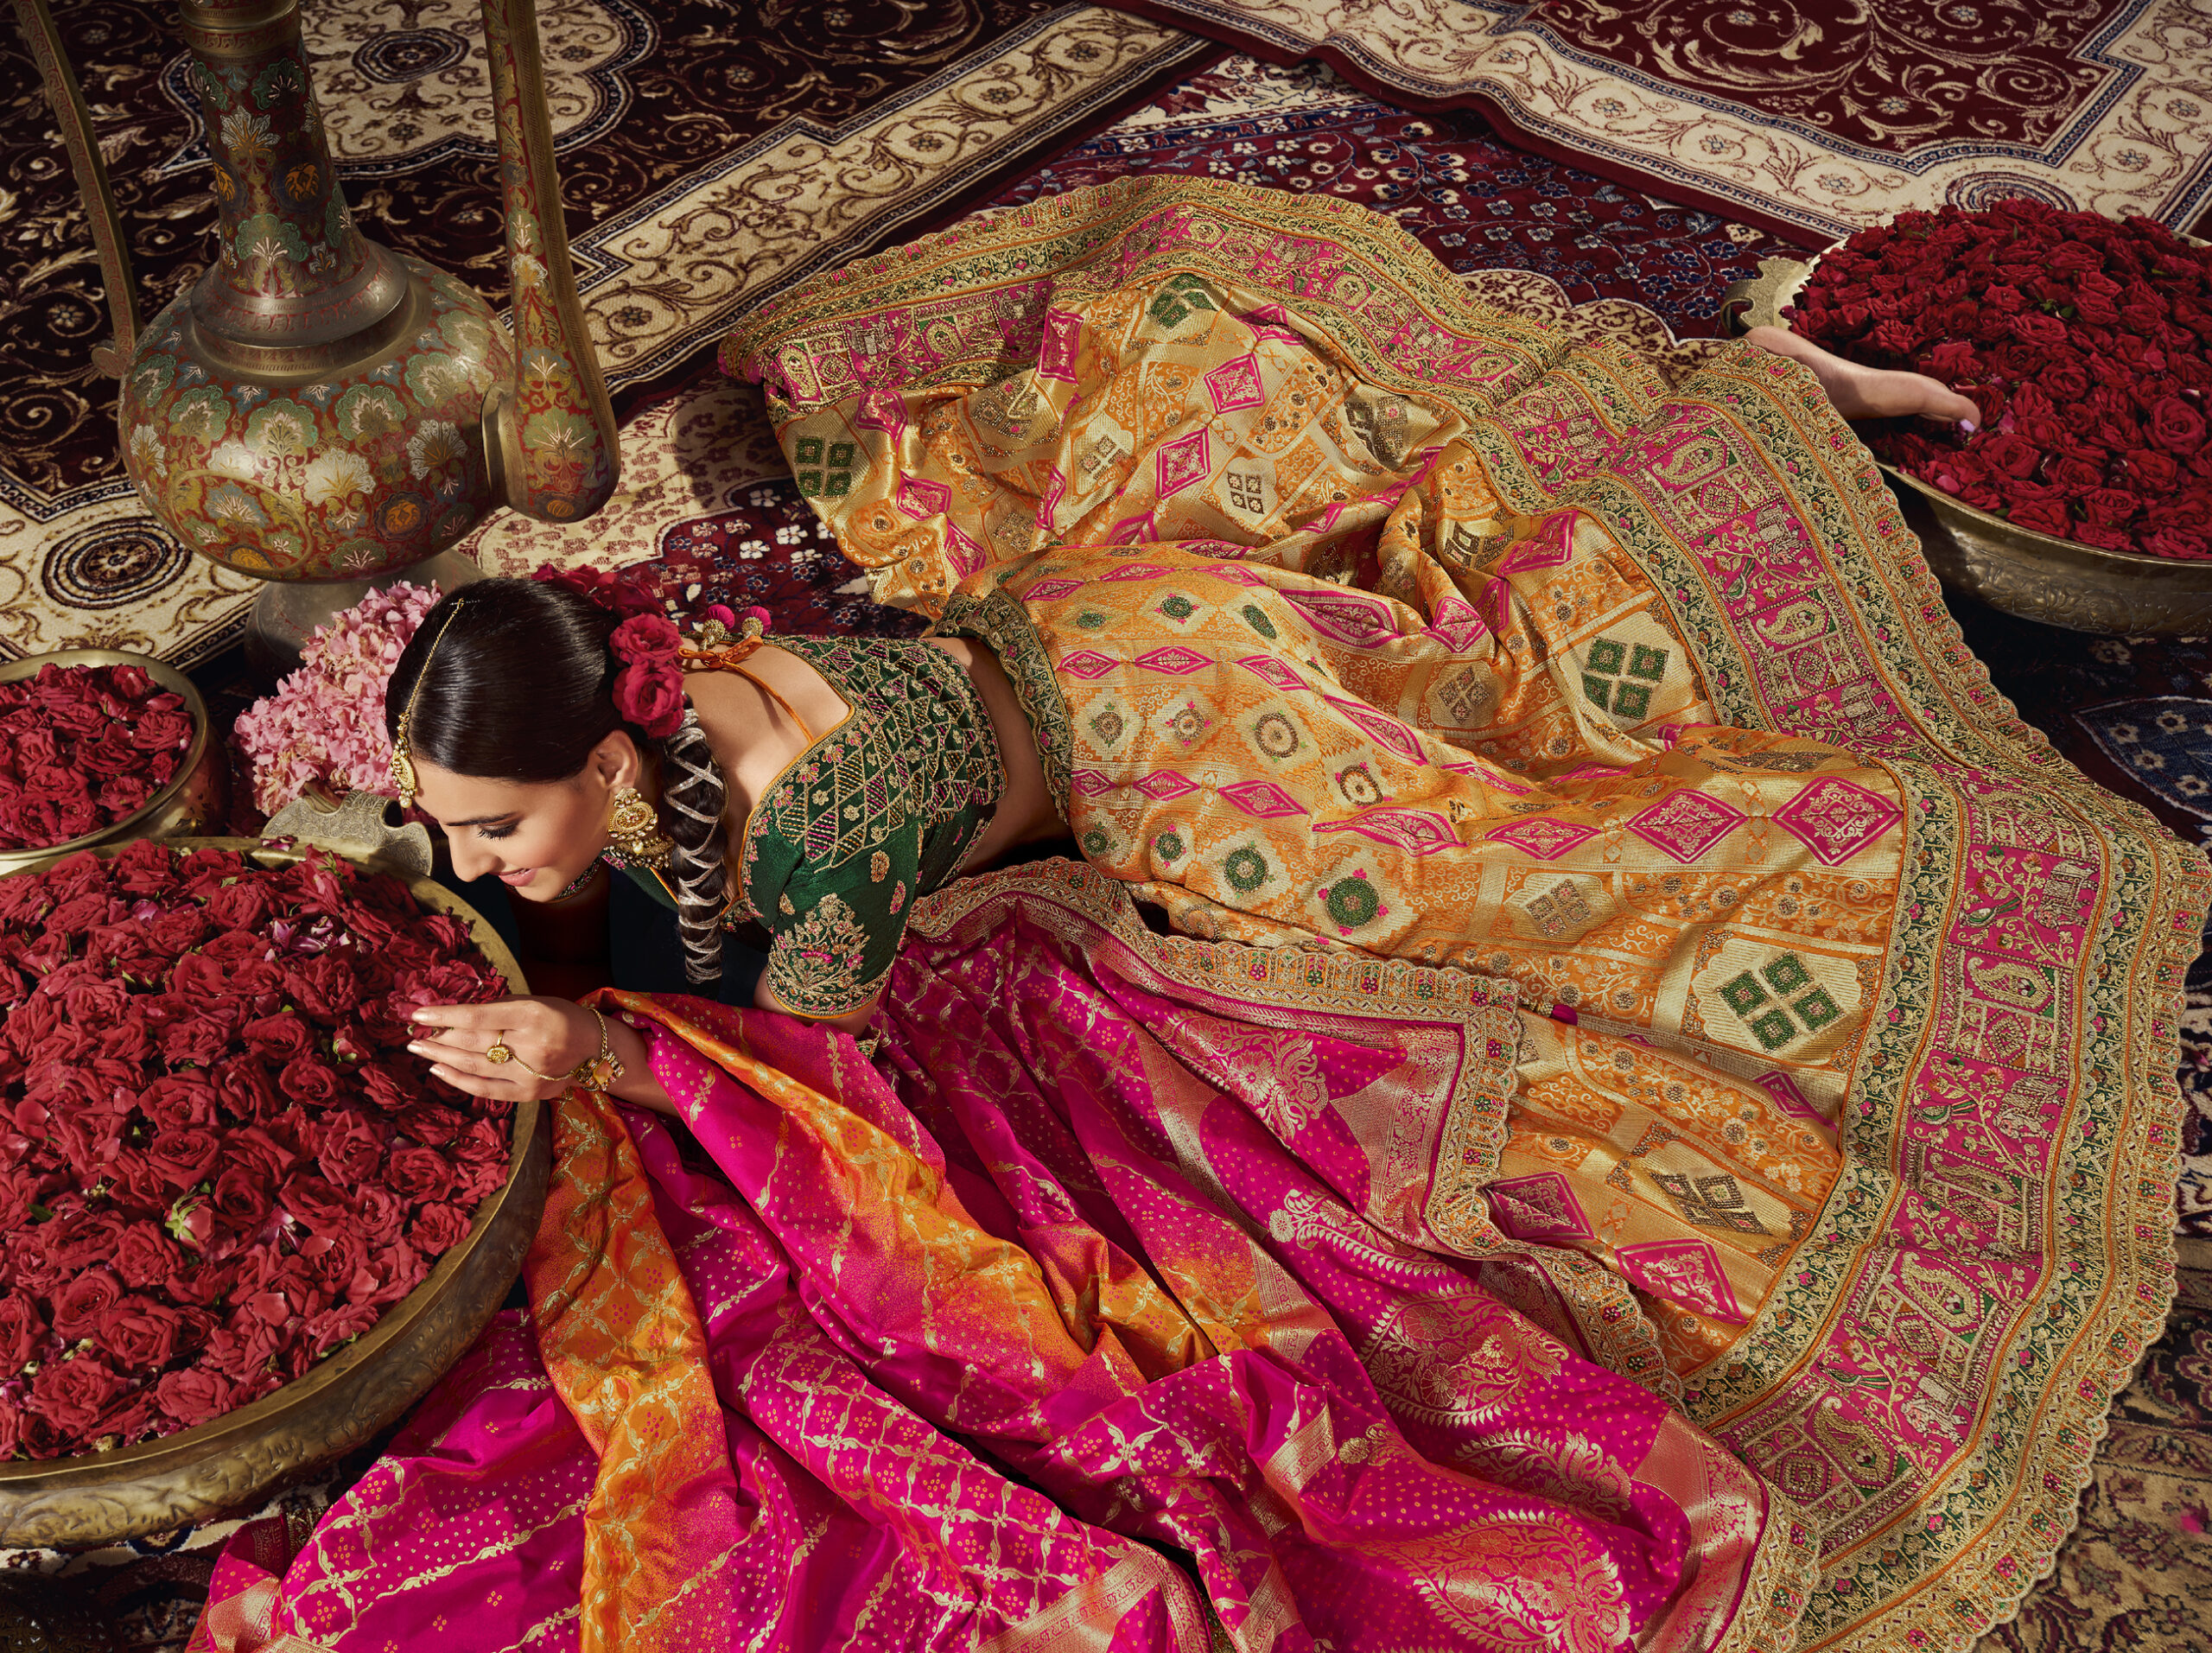 How to Re-Use Your Bridal Lehenga/Saree After Wedding? | IWMBuzz